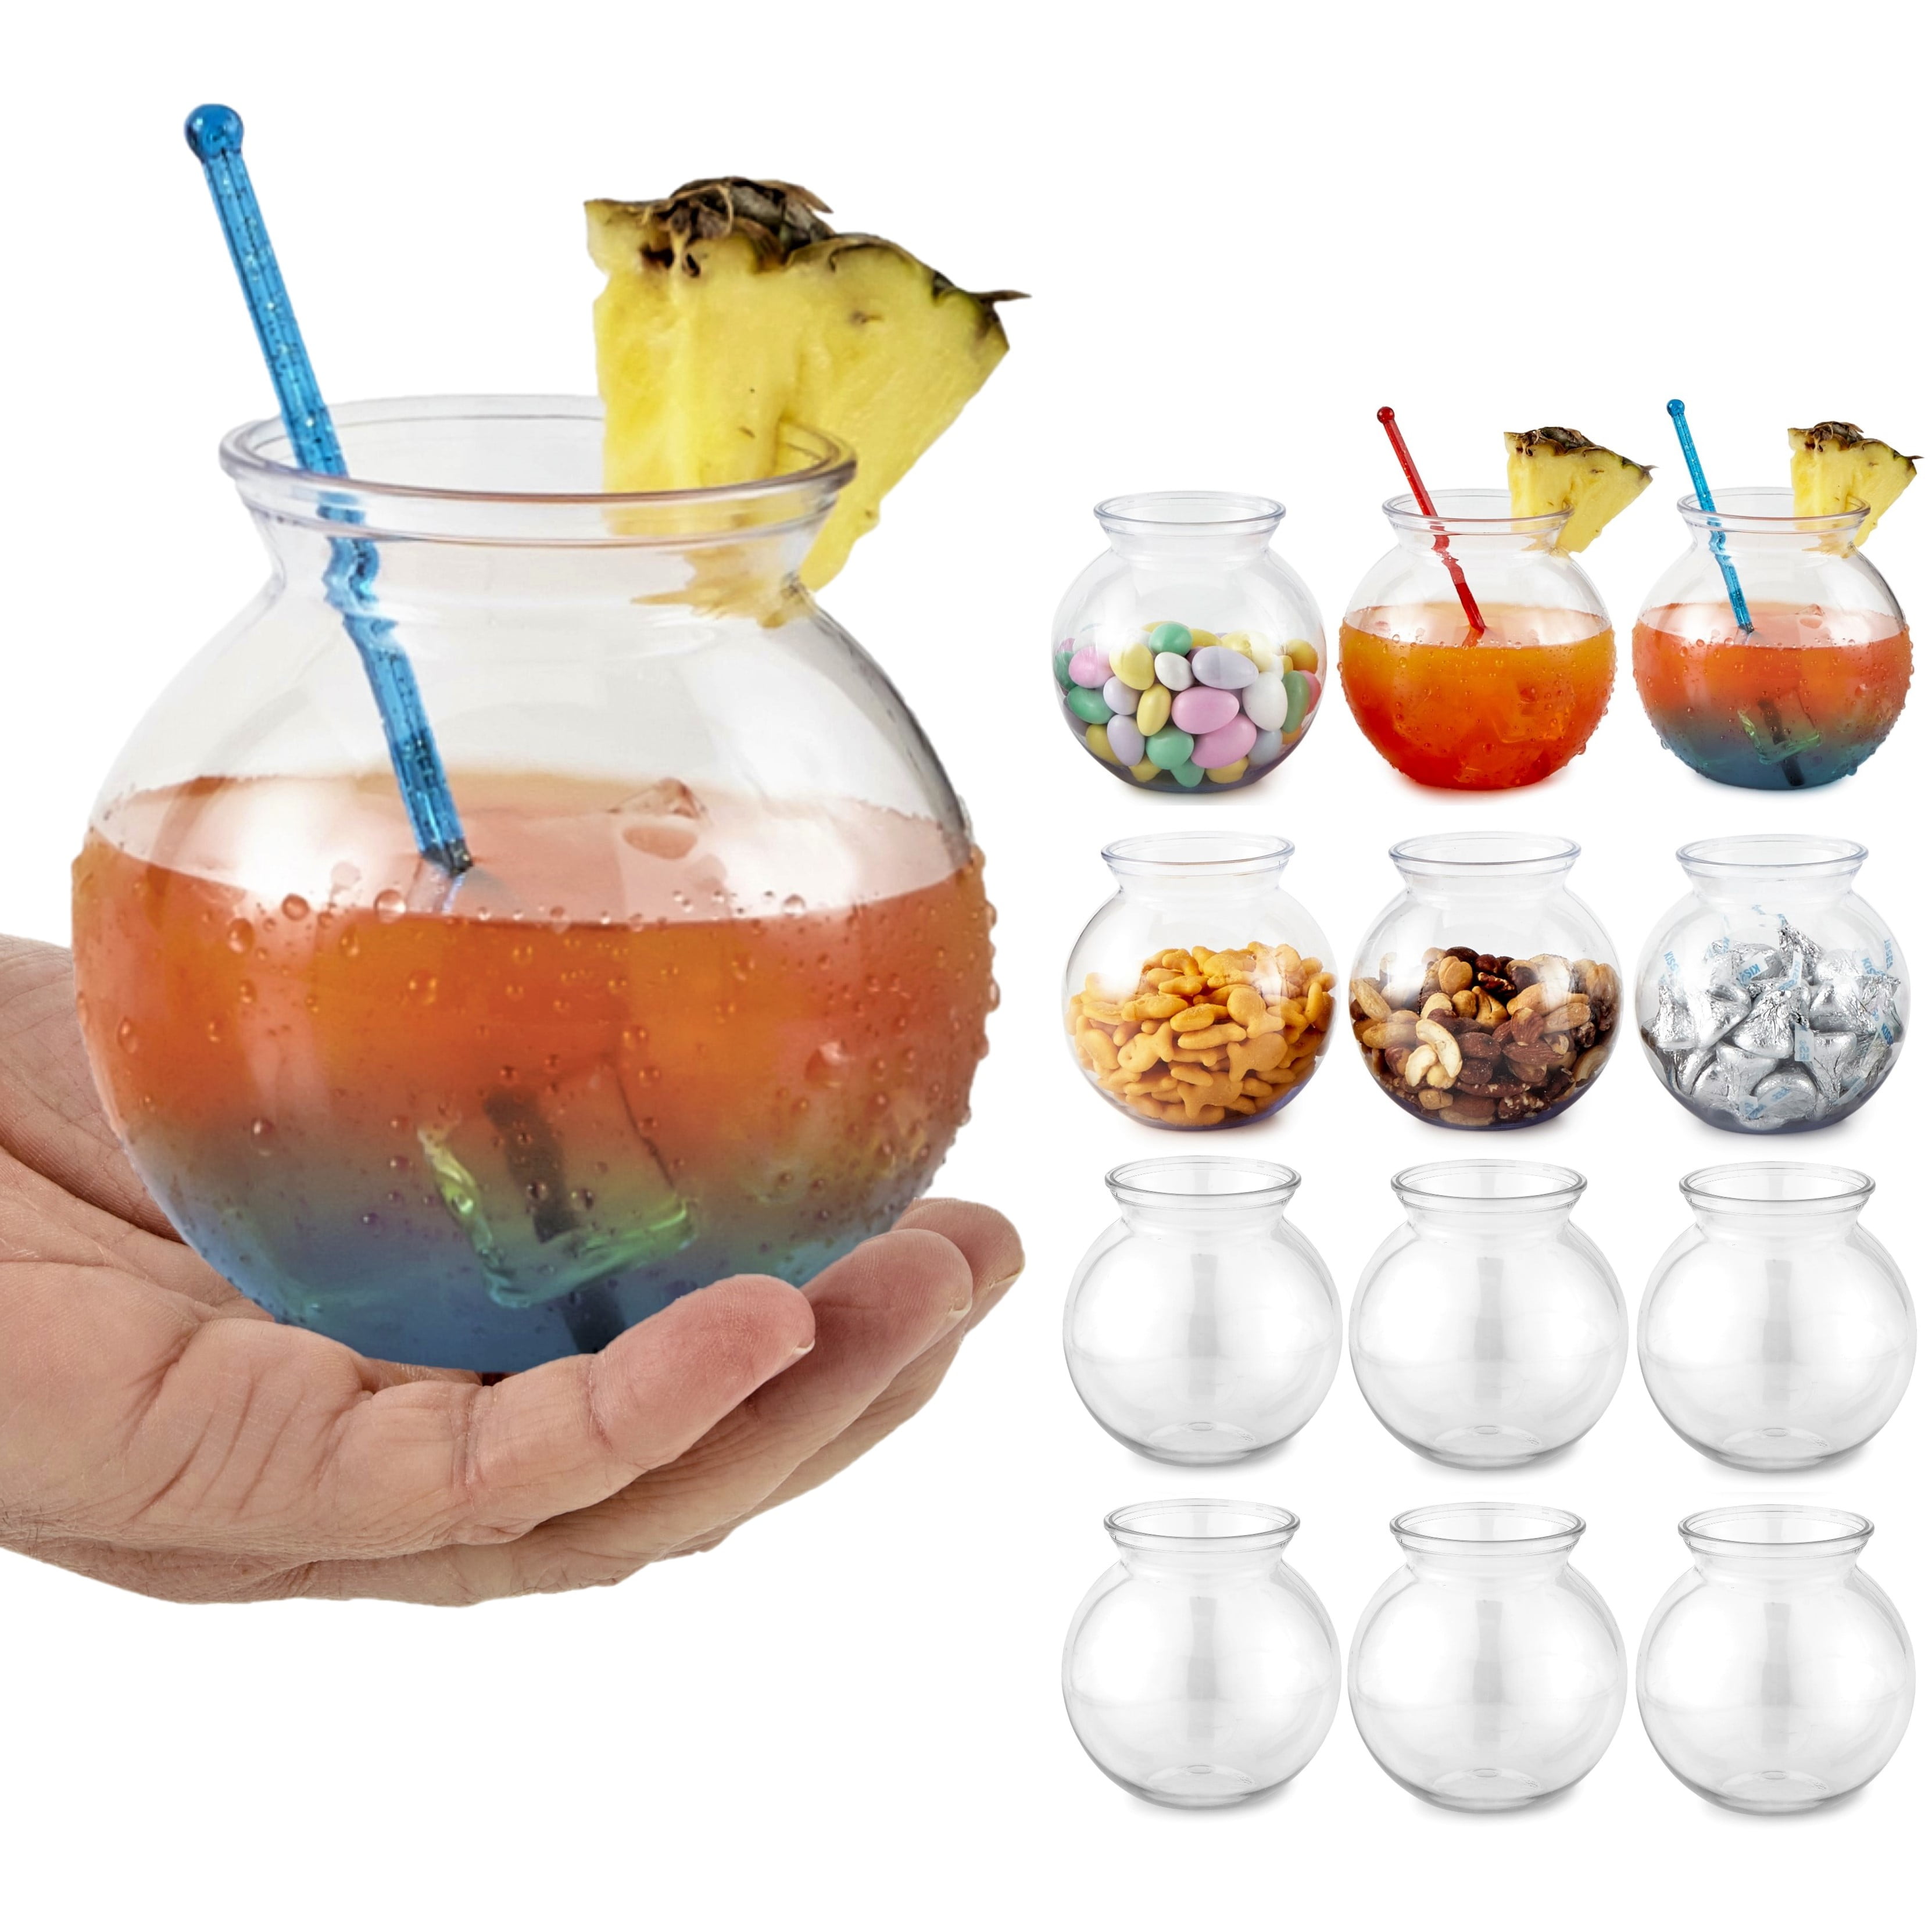 Small Round Plastic Fish Bowls for Parties (12 Pack) 16 oz Clear Mini Drink  Bowl, Shatterproof Fishbowl Glasses for Drinks, Centerpieces, Decorations,  Goldfish Pond Carnival Game, Centerpiece Vases 